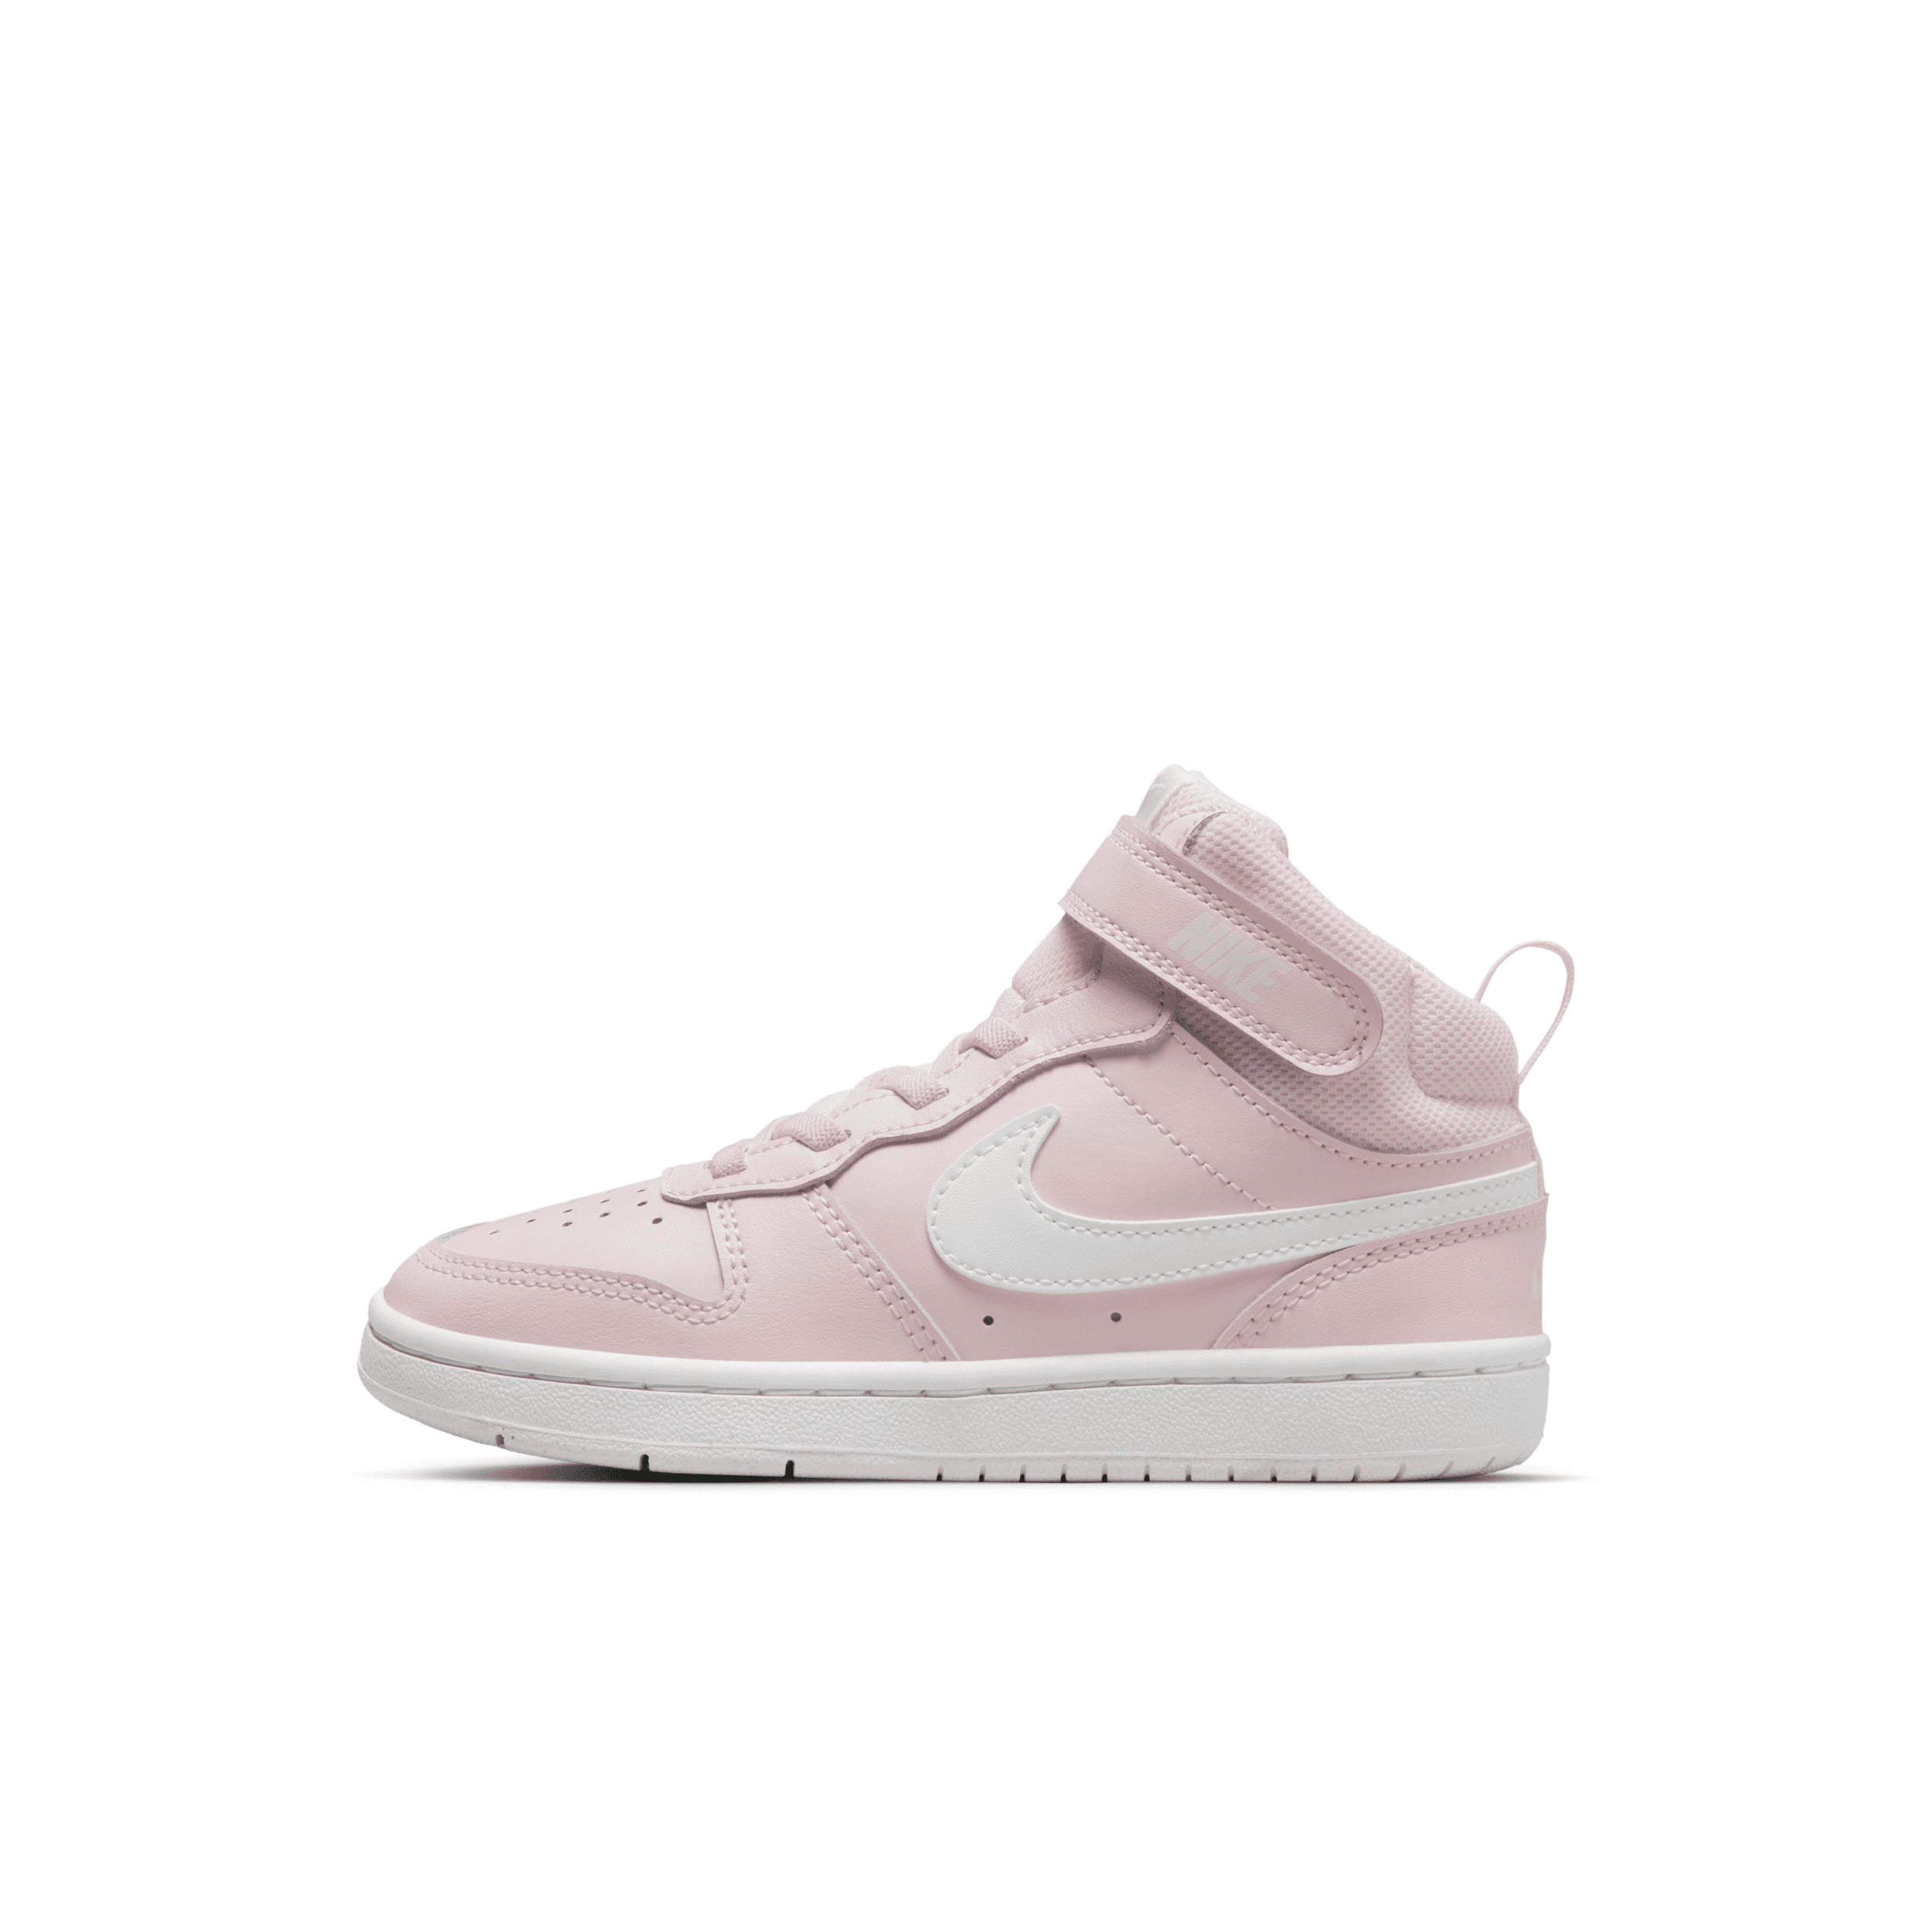 Nike Babies' Court Borough Mid 2 Little Kids' Shoes In Pink